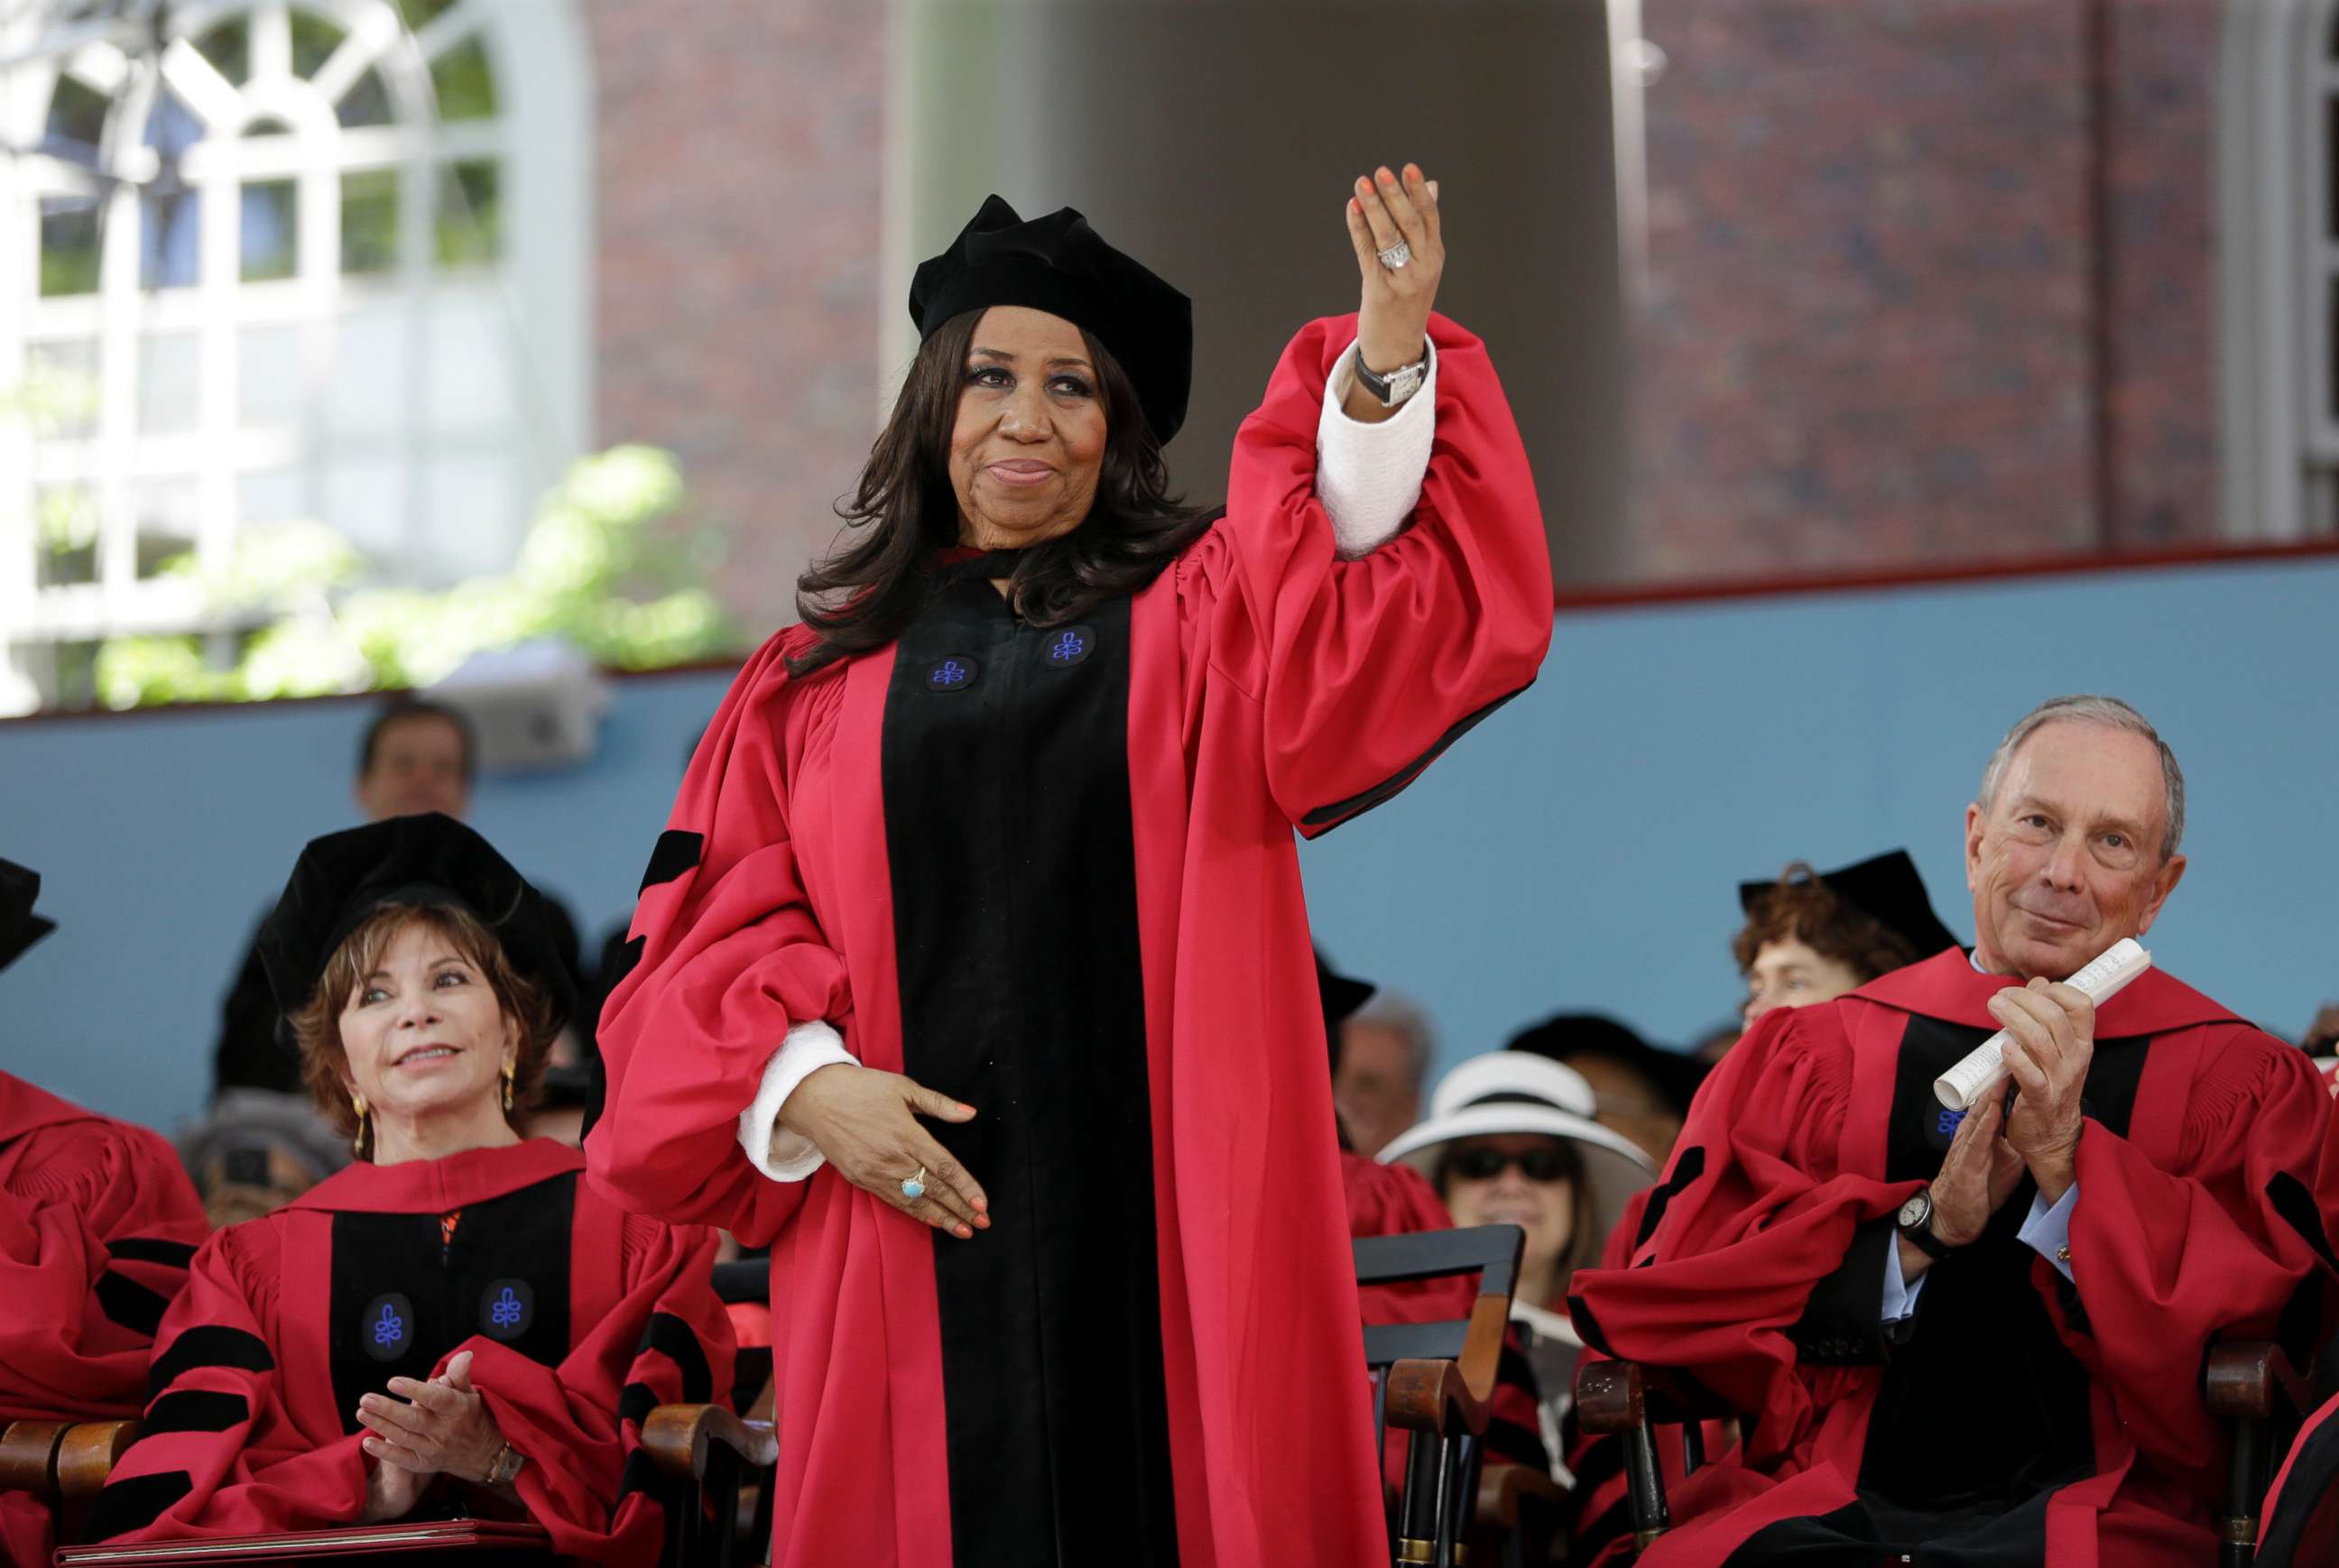 PHOTO: Aretha Franklin waves as she receives an honorary Doctor of Arts degree during Harvard commencement ceremonies in Cambridge, Mass, May 29, 2014.